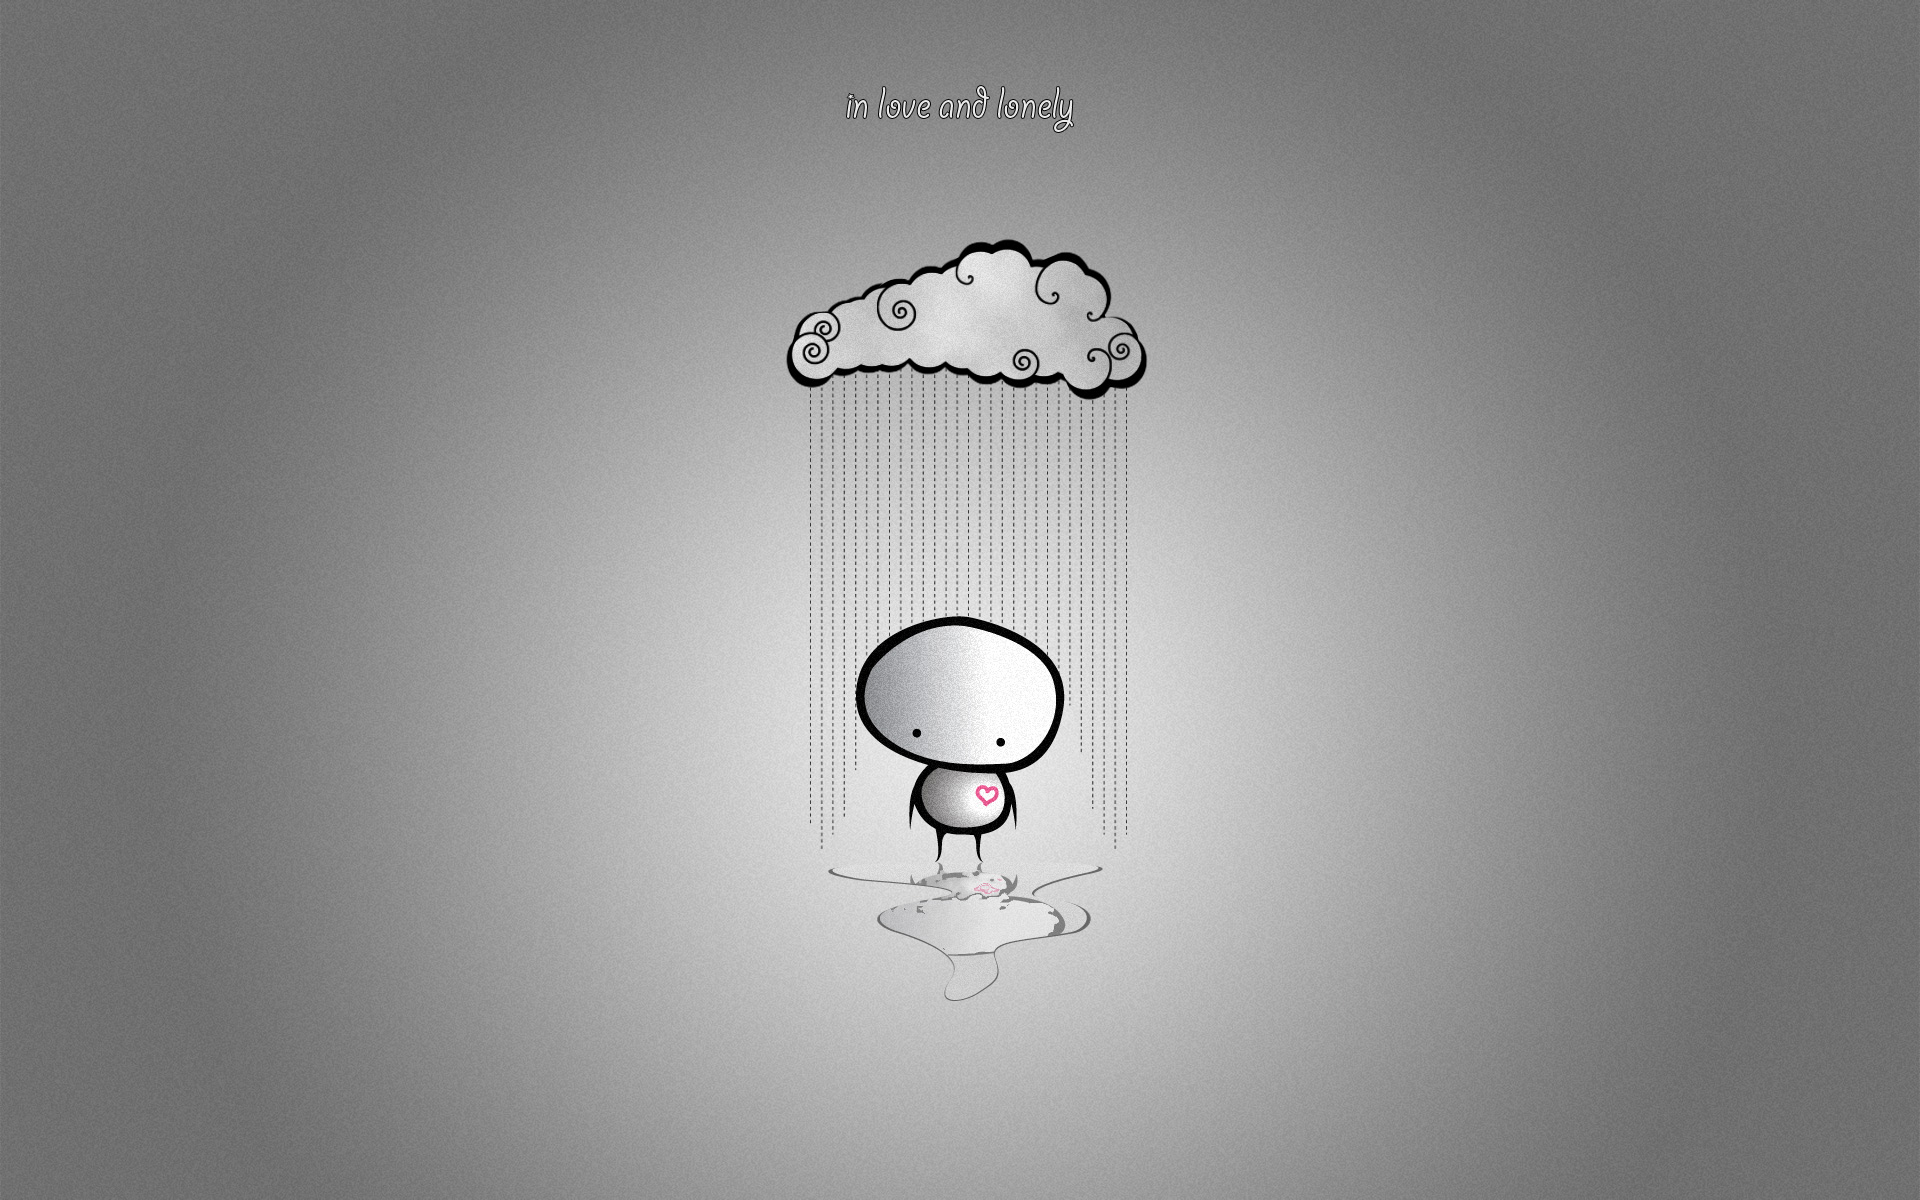 love, mood, lonely, sad, minimalist, gray, cloud, artistic wallpaper for mobile